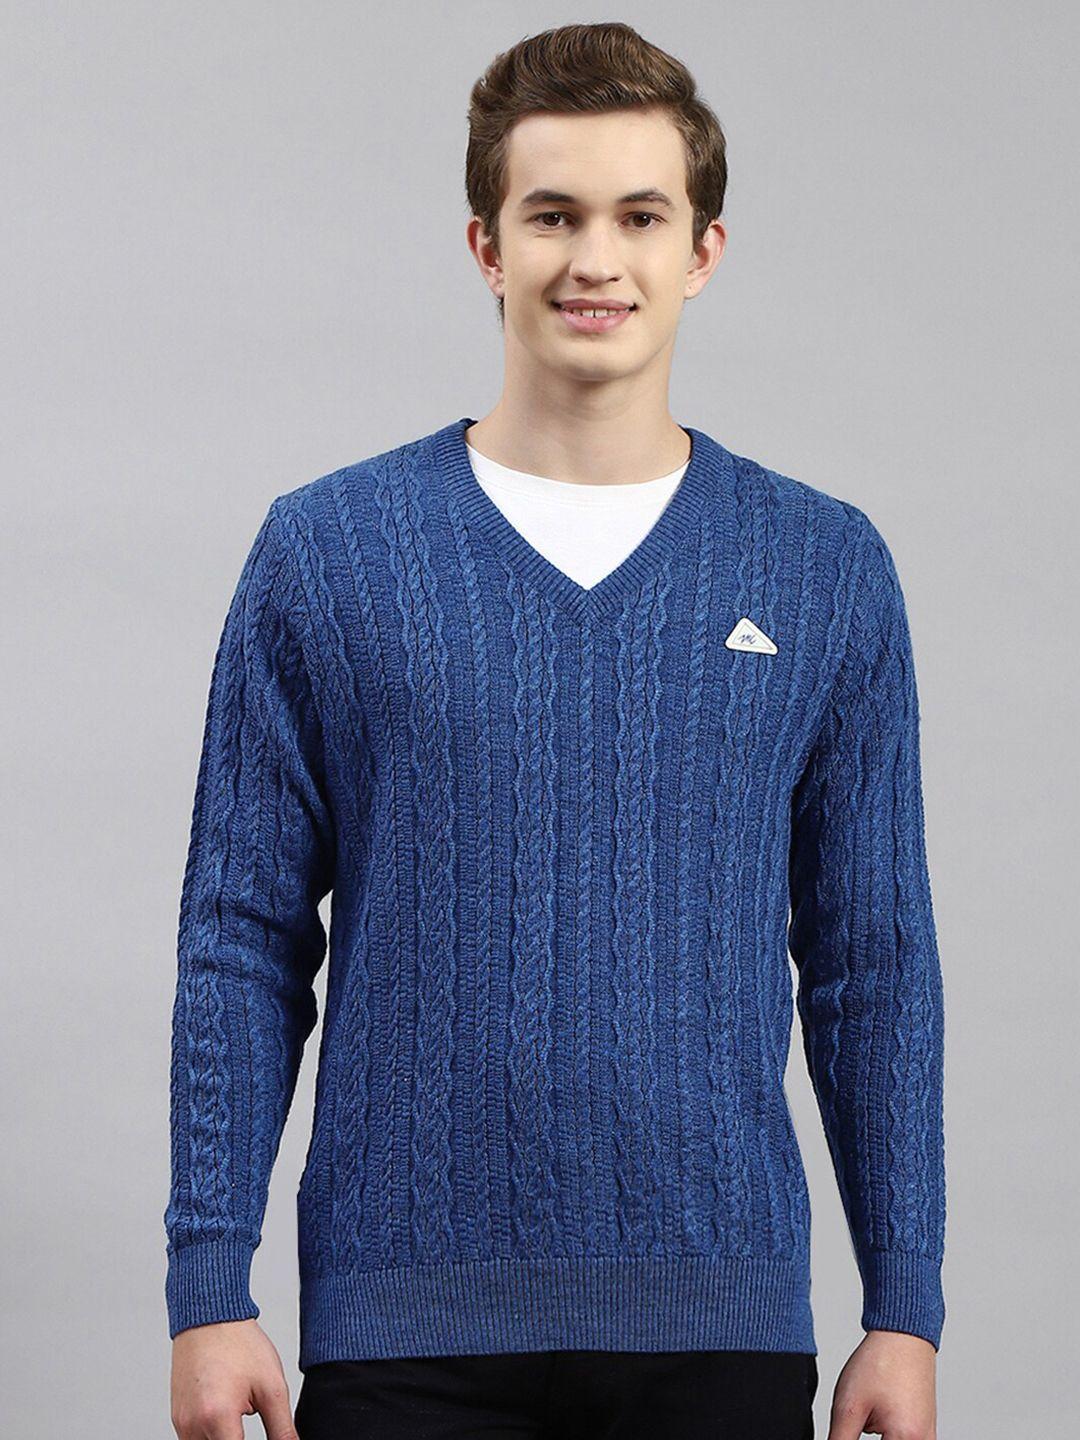 monte-carlo-cable-knit-woollen-pullover-sweater